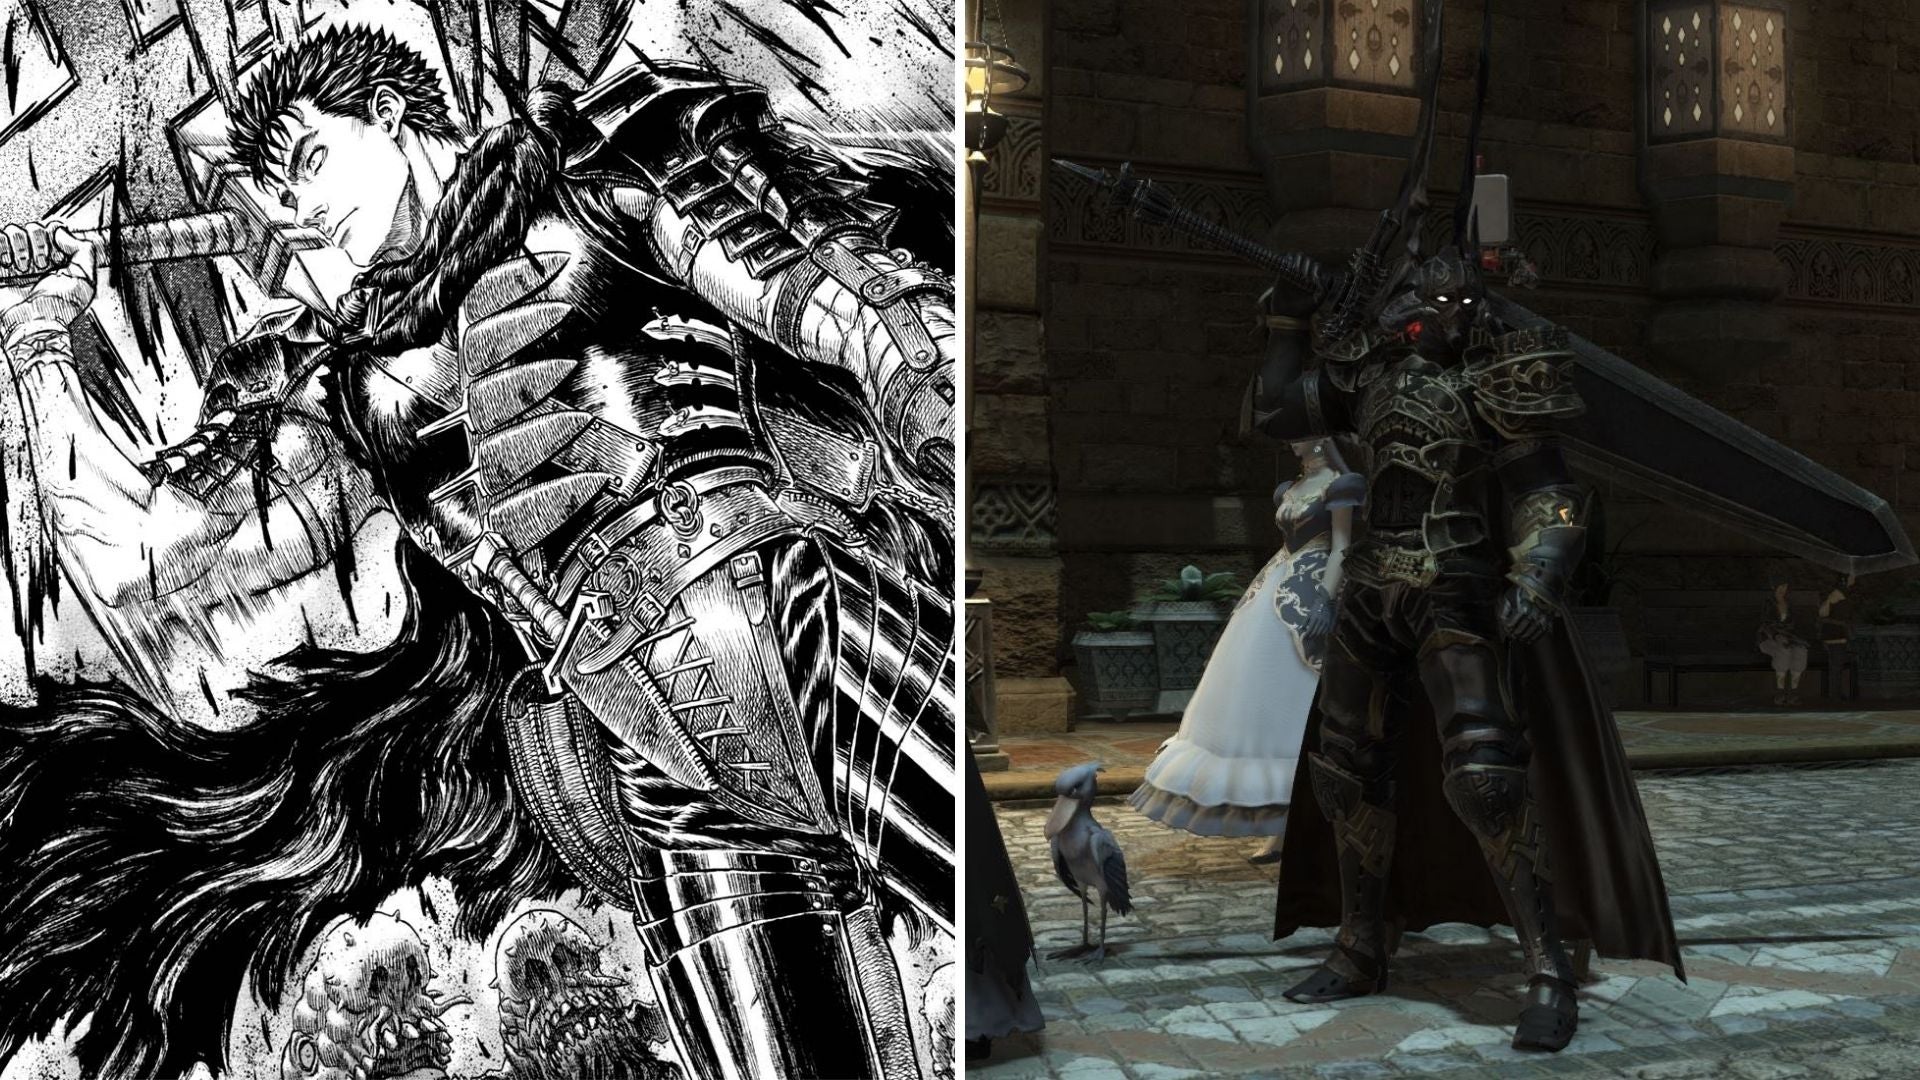 It's easy to see the influence between Guts and FF14's Dark Knight class. (Image: Hakuensha / Square Enix / Kotaku)